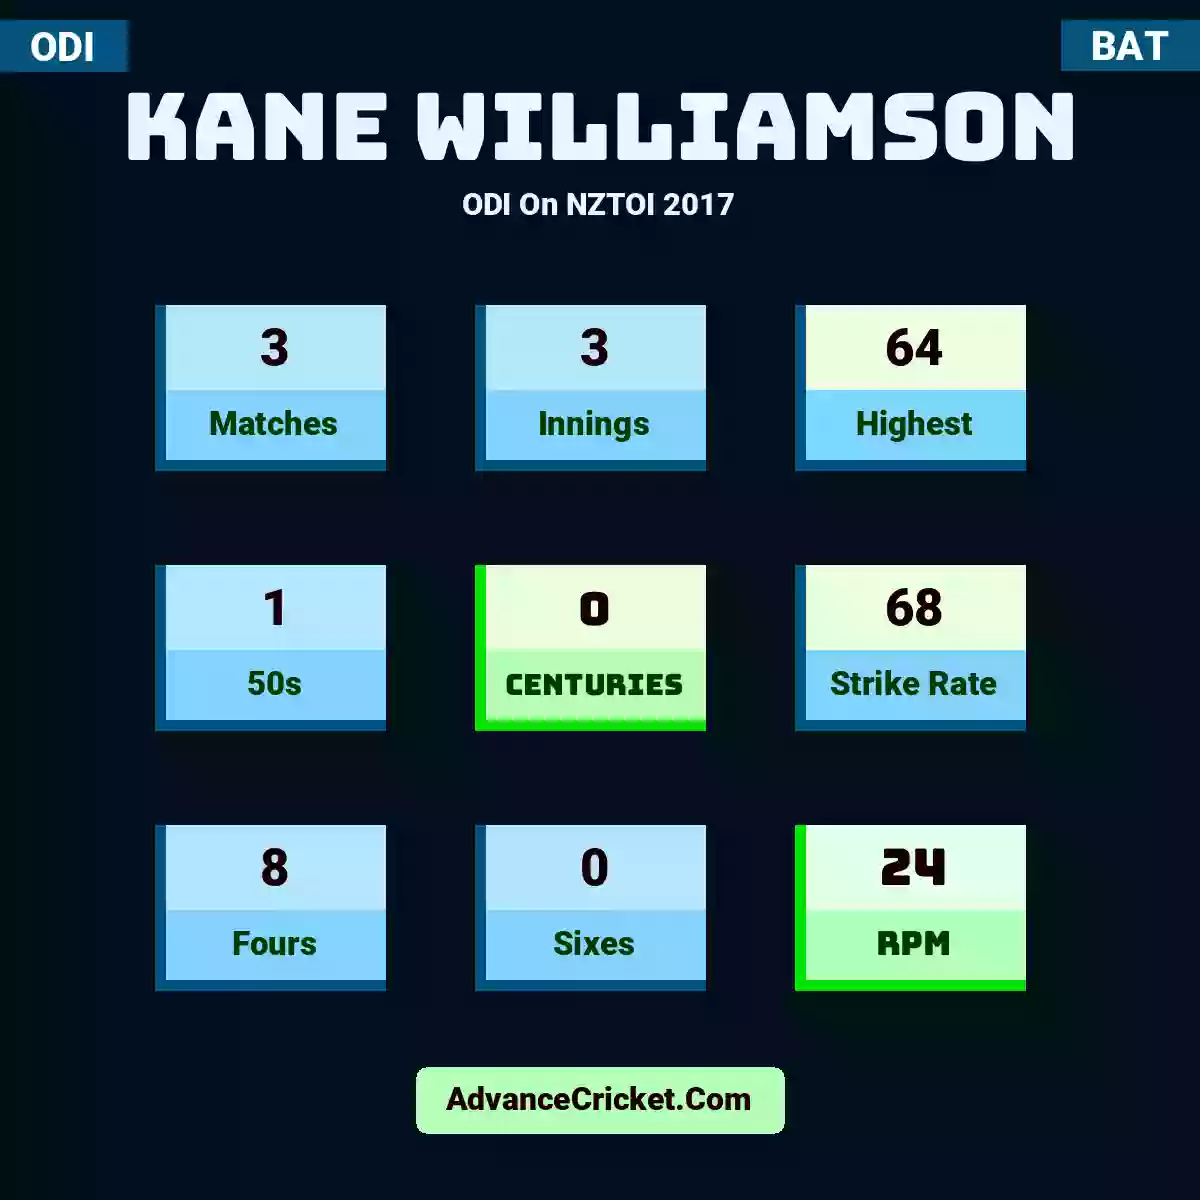 Kane Williamson ODI  On NZTOI 2017, Kane Williamson played 3 matches, scored 64 runs as highest, 1 half-centuries, and 0 centuries, with a strike rate of 68. K.Williamson hit 8 fours and 0 sixes, with an RPM of 24.